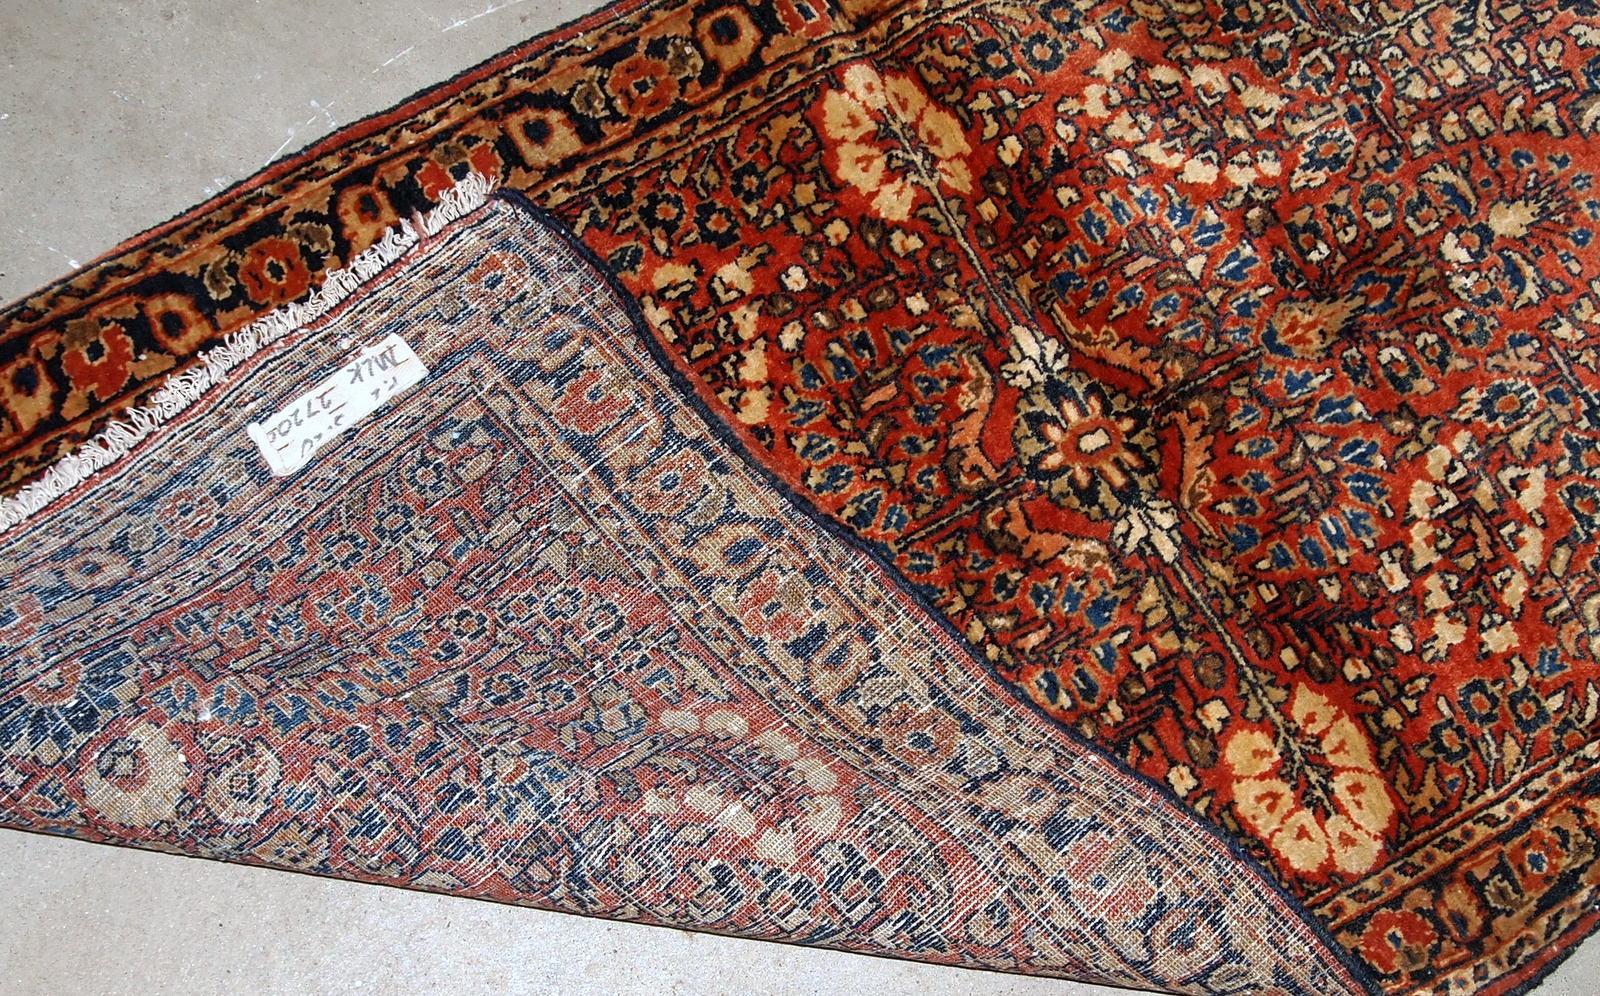 Handmade antique Sarouk style rug in original good condition. The rug is from the beginning of 20th century made in red wool.

- Condition: original good,

- circa 1920s,

- Size: 2.4' x 5.3' (73cm x 161cm),

- Material: wool,

- Country